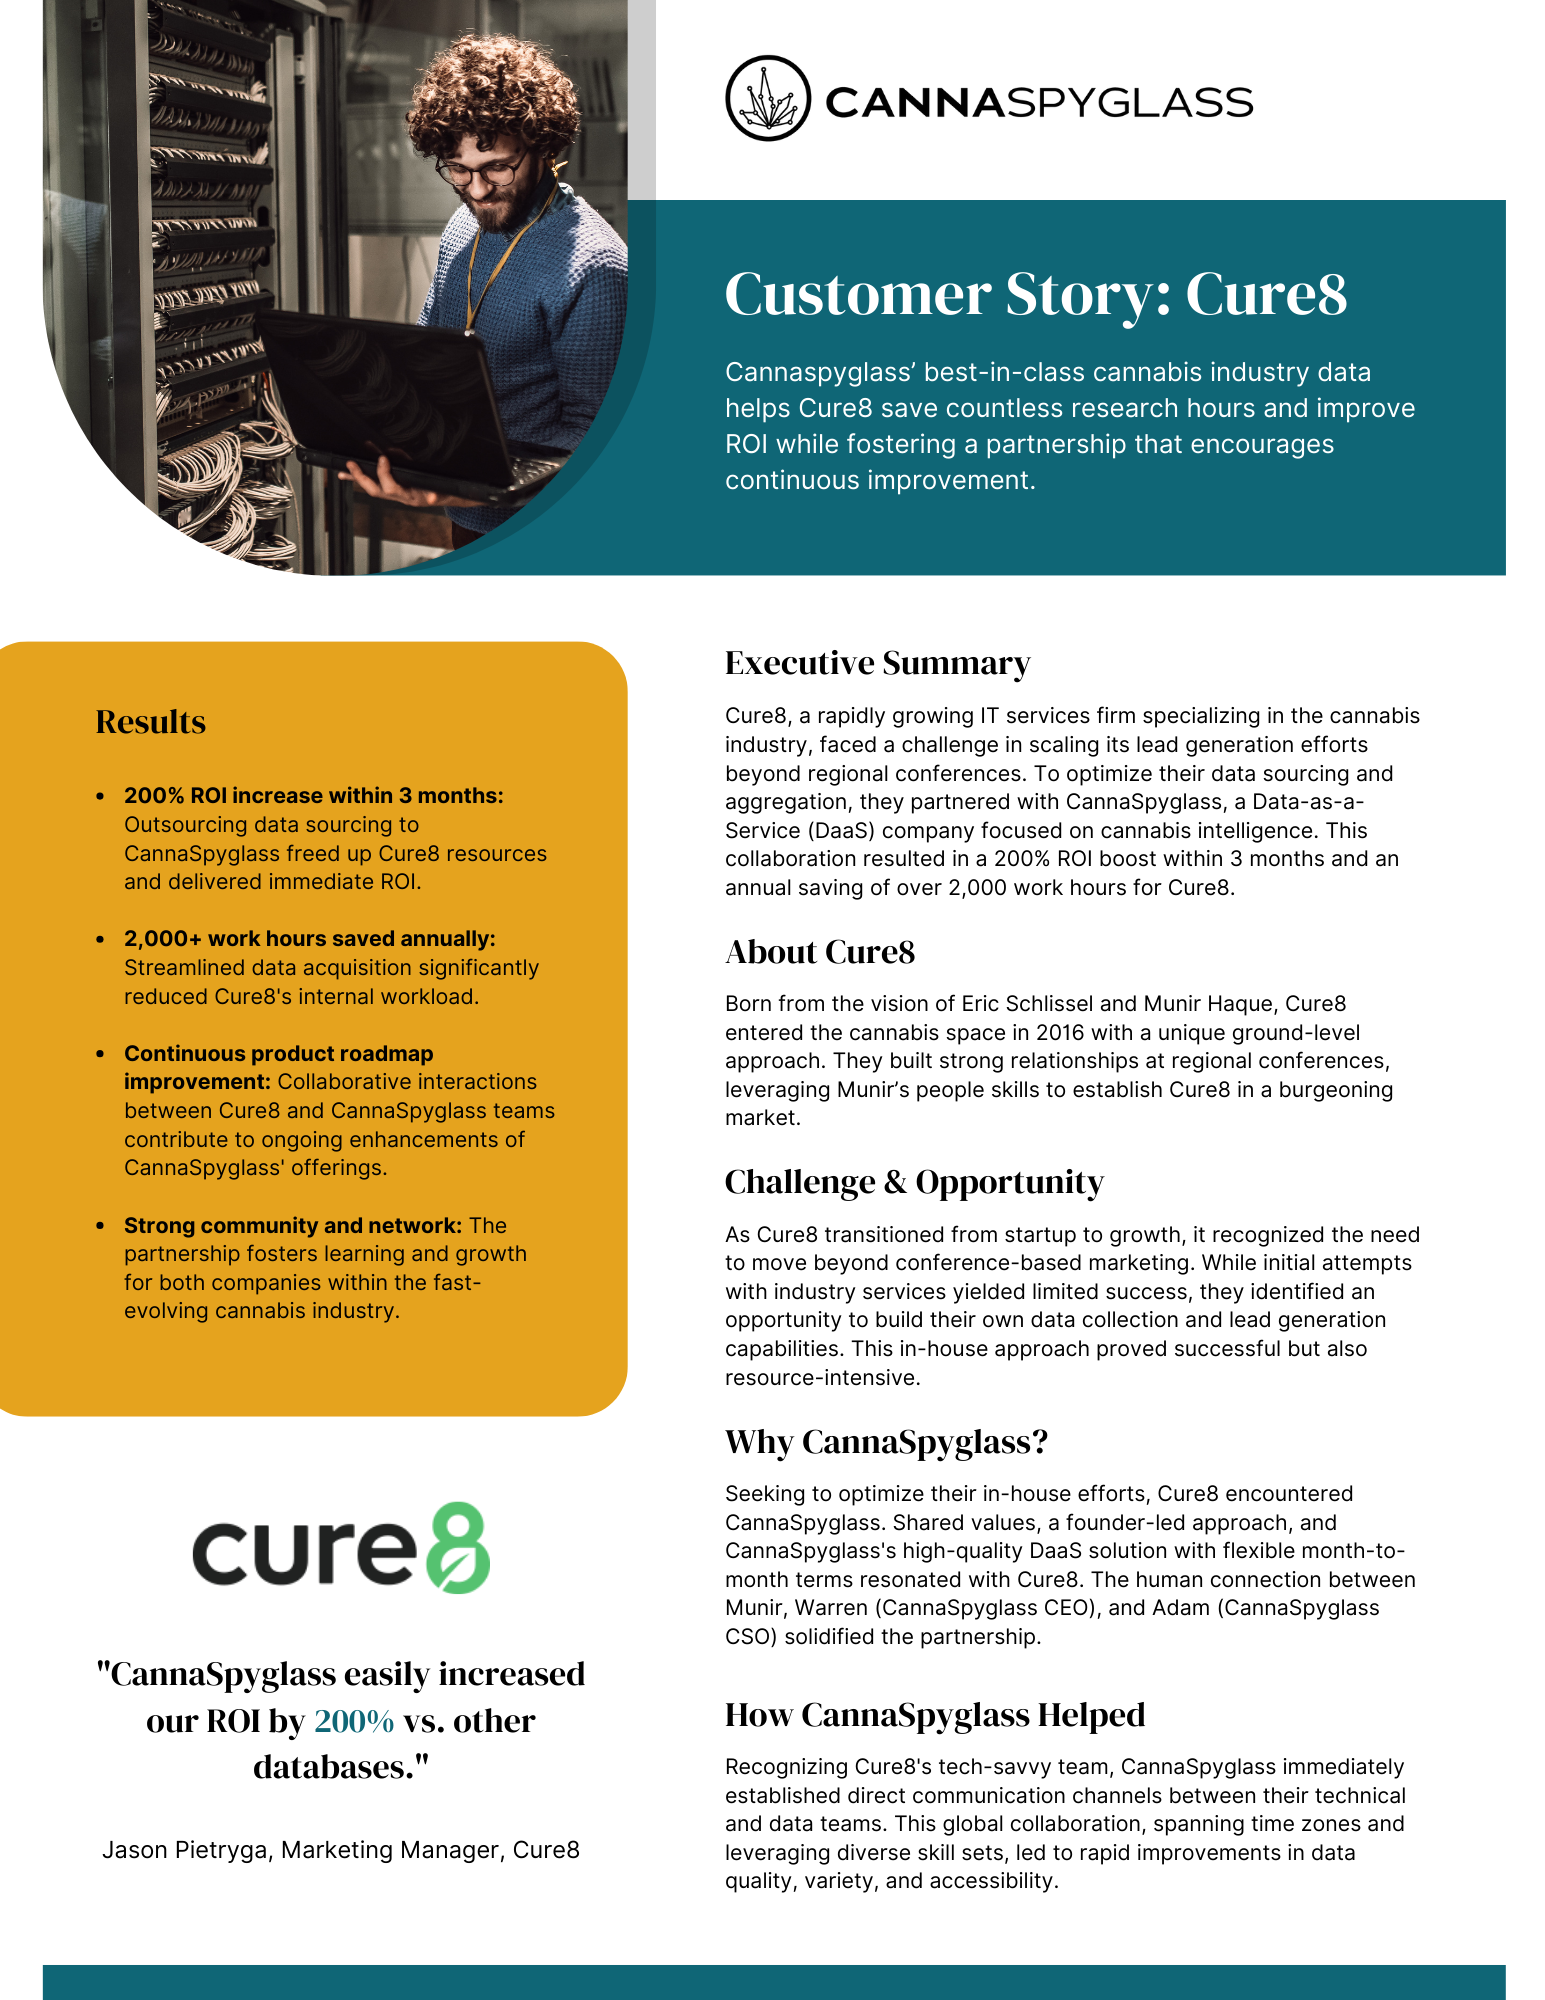 A customer story discussing how CannaSpyglass has helped Cure8 save countless research hours and improve ROI while fostering a partnership that encourages continuous improvement.